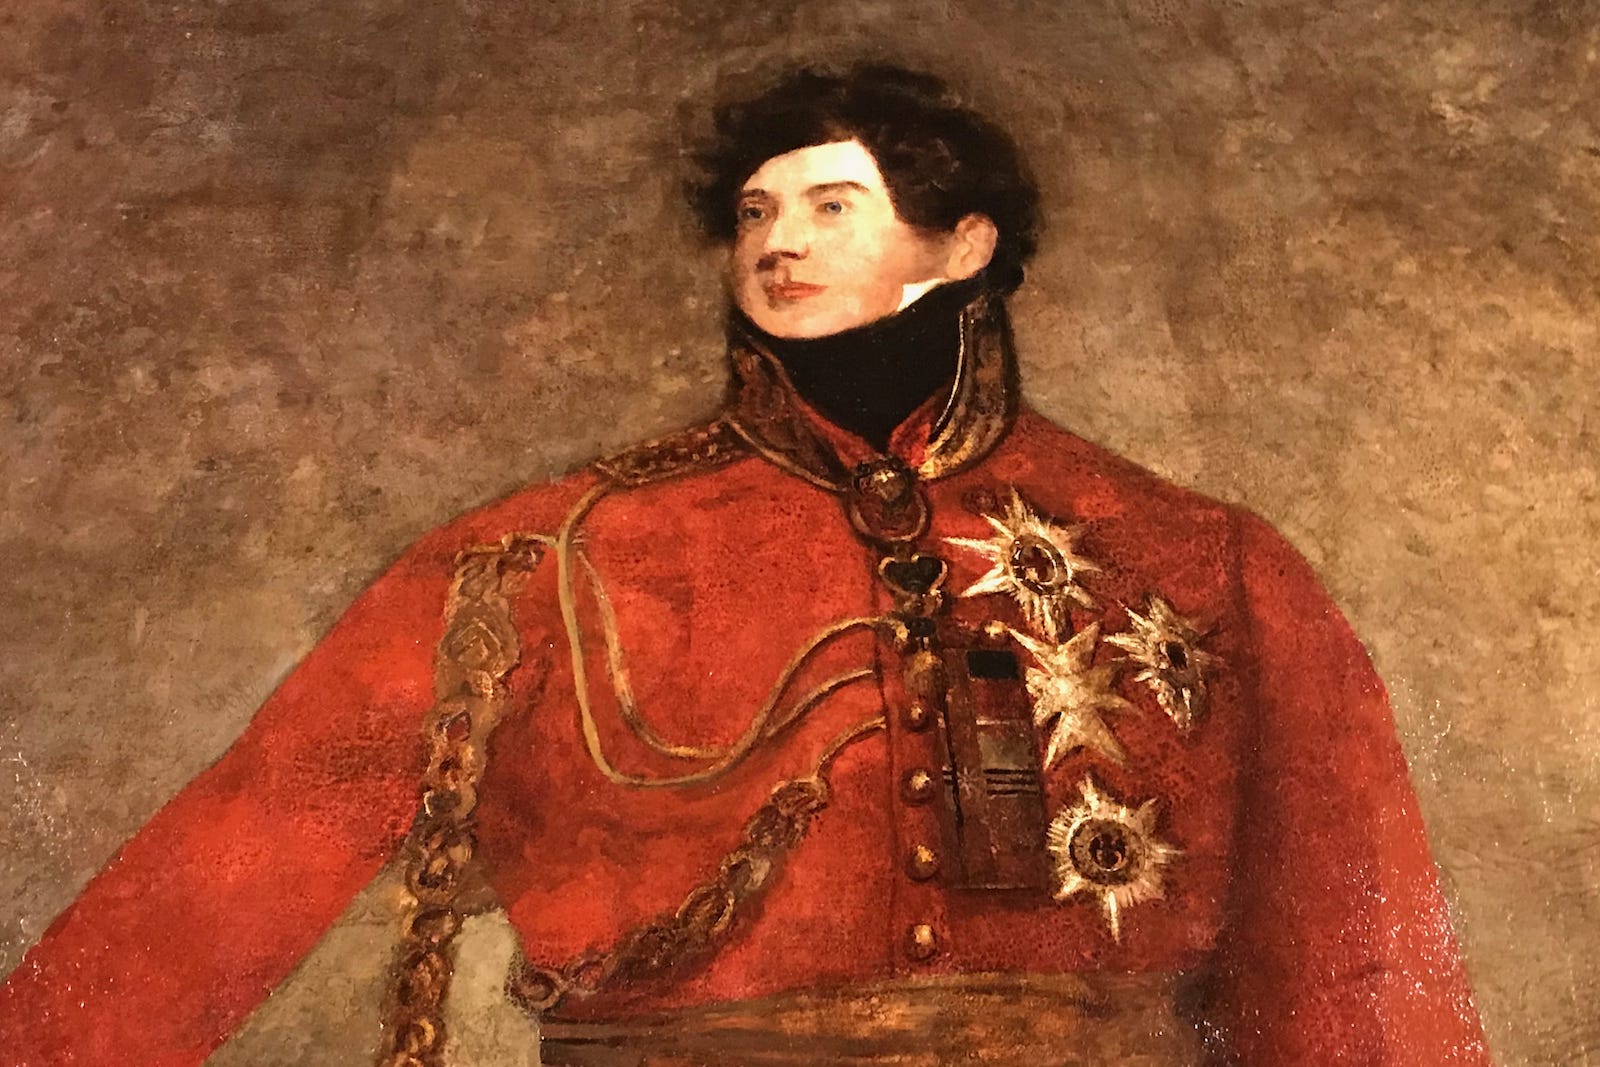 A royal man in red uniform is painted against a brown background